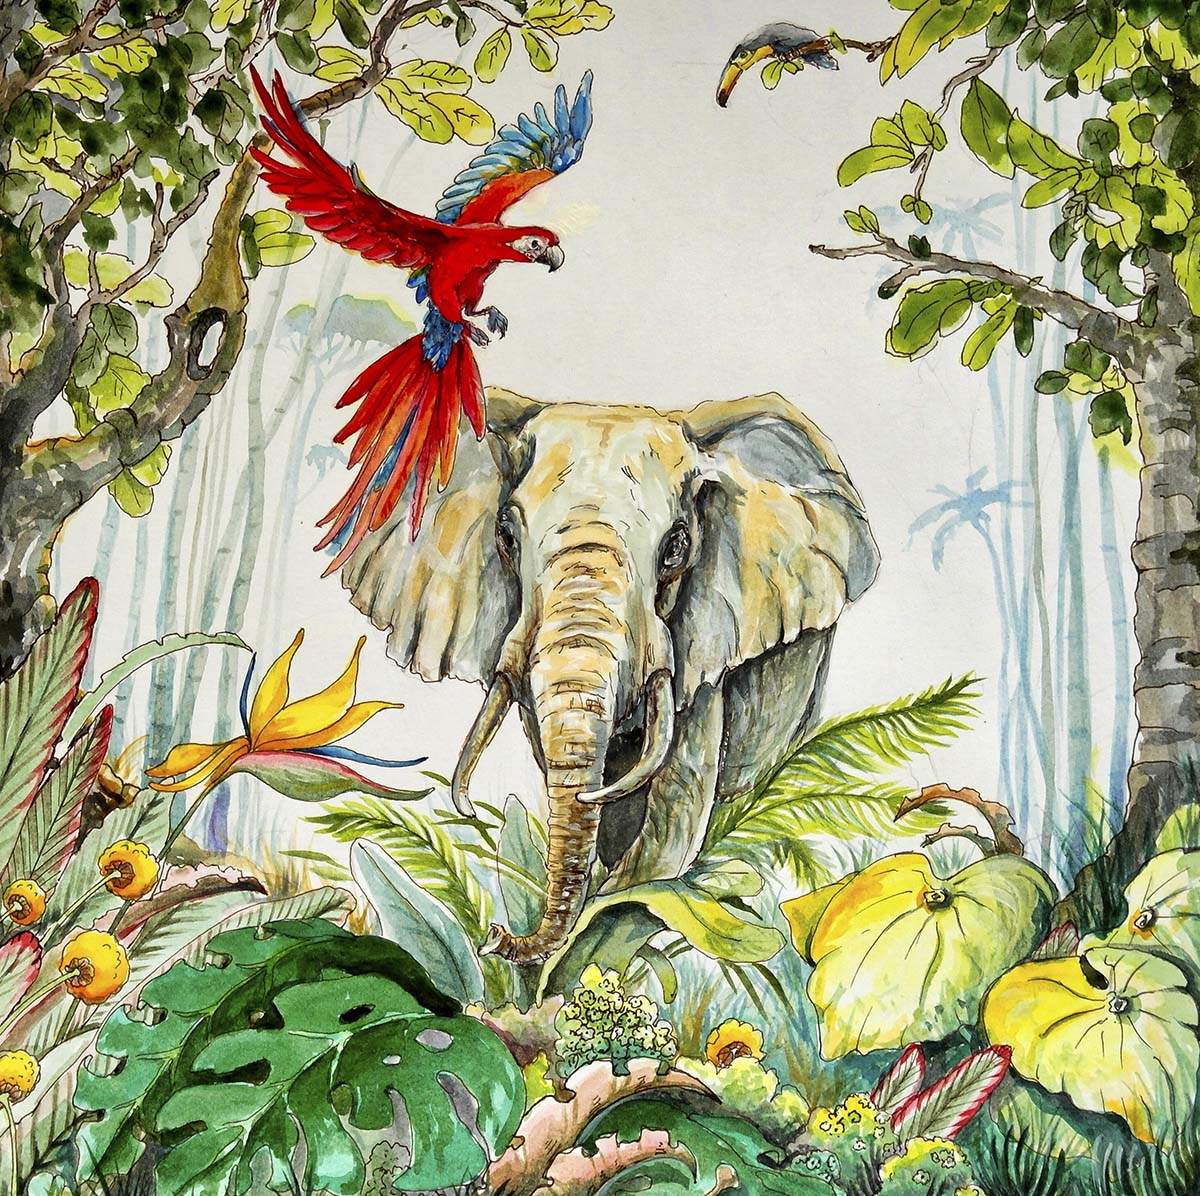 An elephant and parrot in the jungle